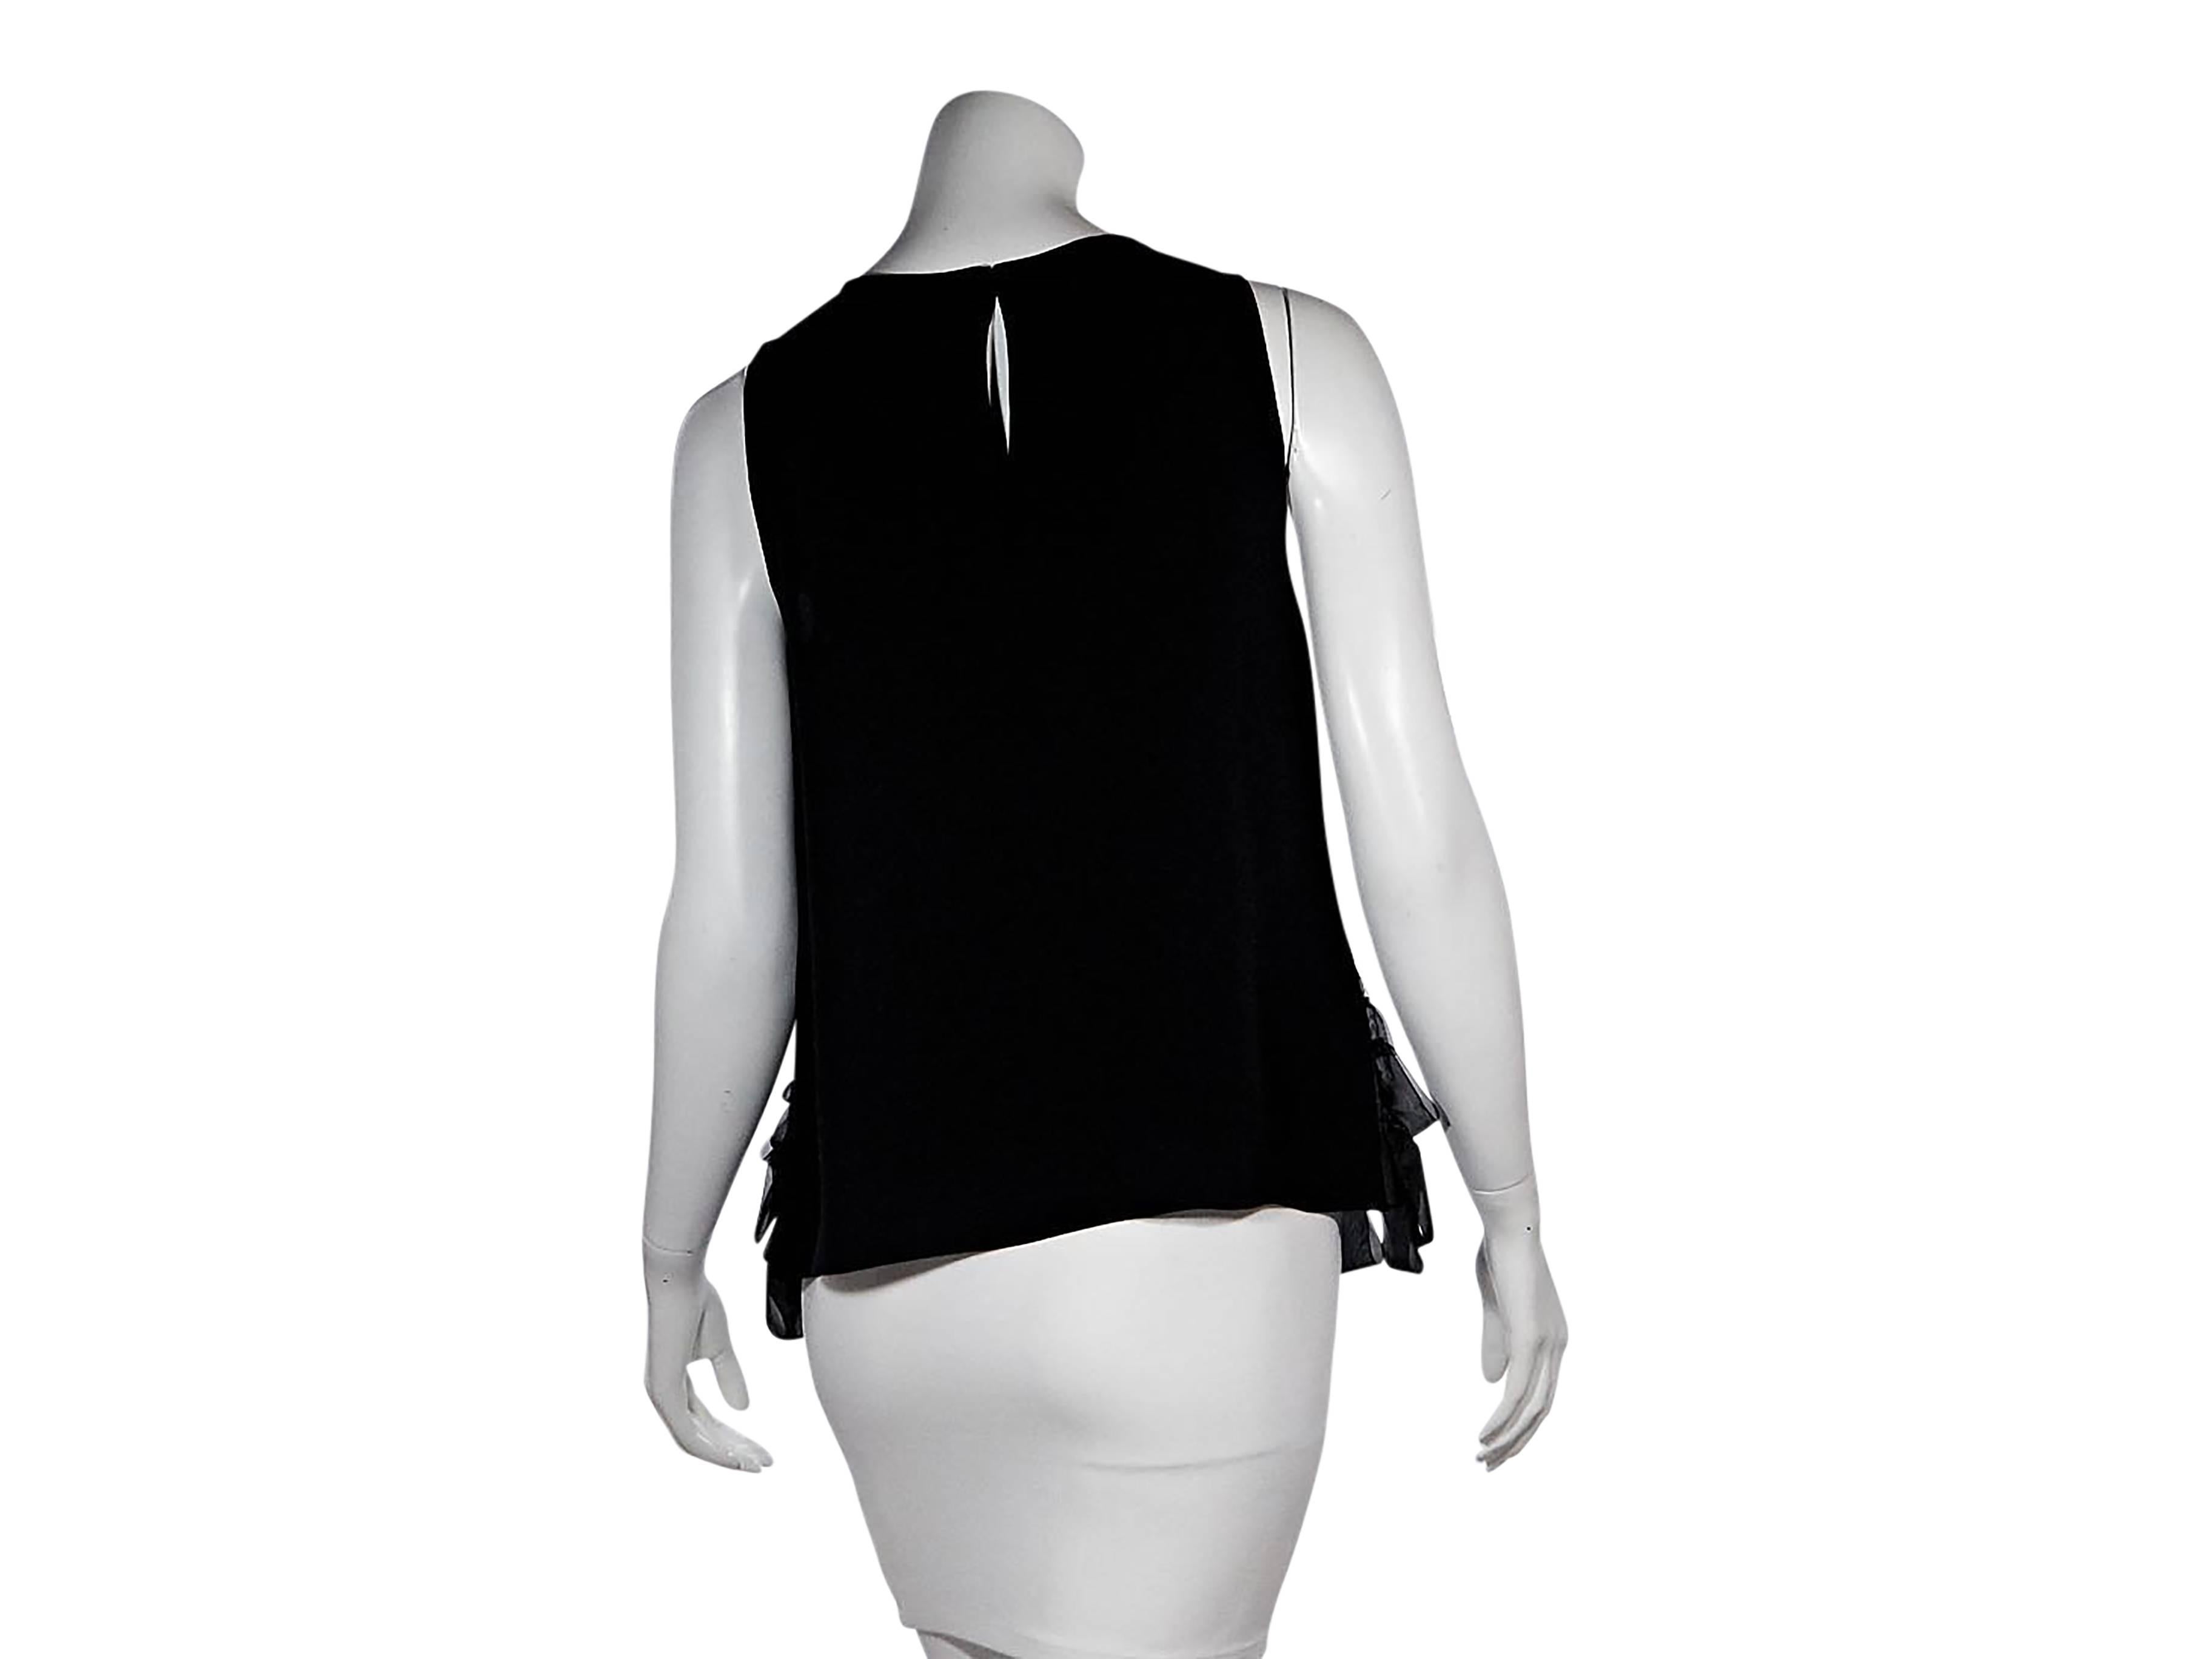 Product details:  Black embellished tank by Carolina Herrera.  Scoopneck.  Sleeveless.  Back button closure with keyhole cutout. 
Condition: Pre-owned. Very good.

Est. Retail $ 798.00